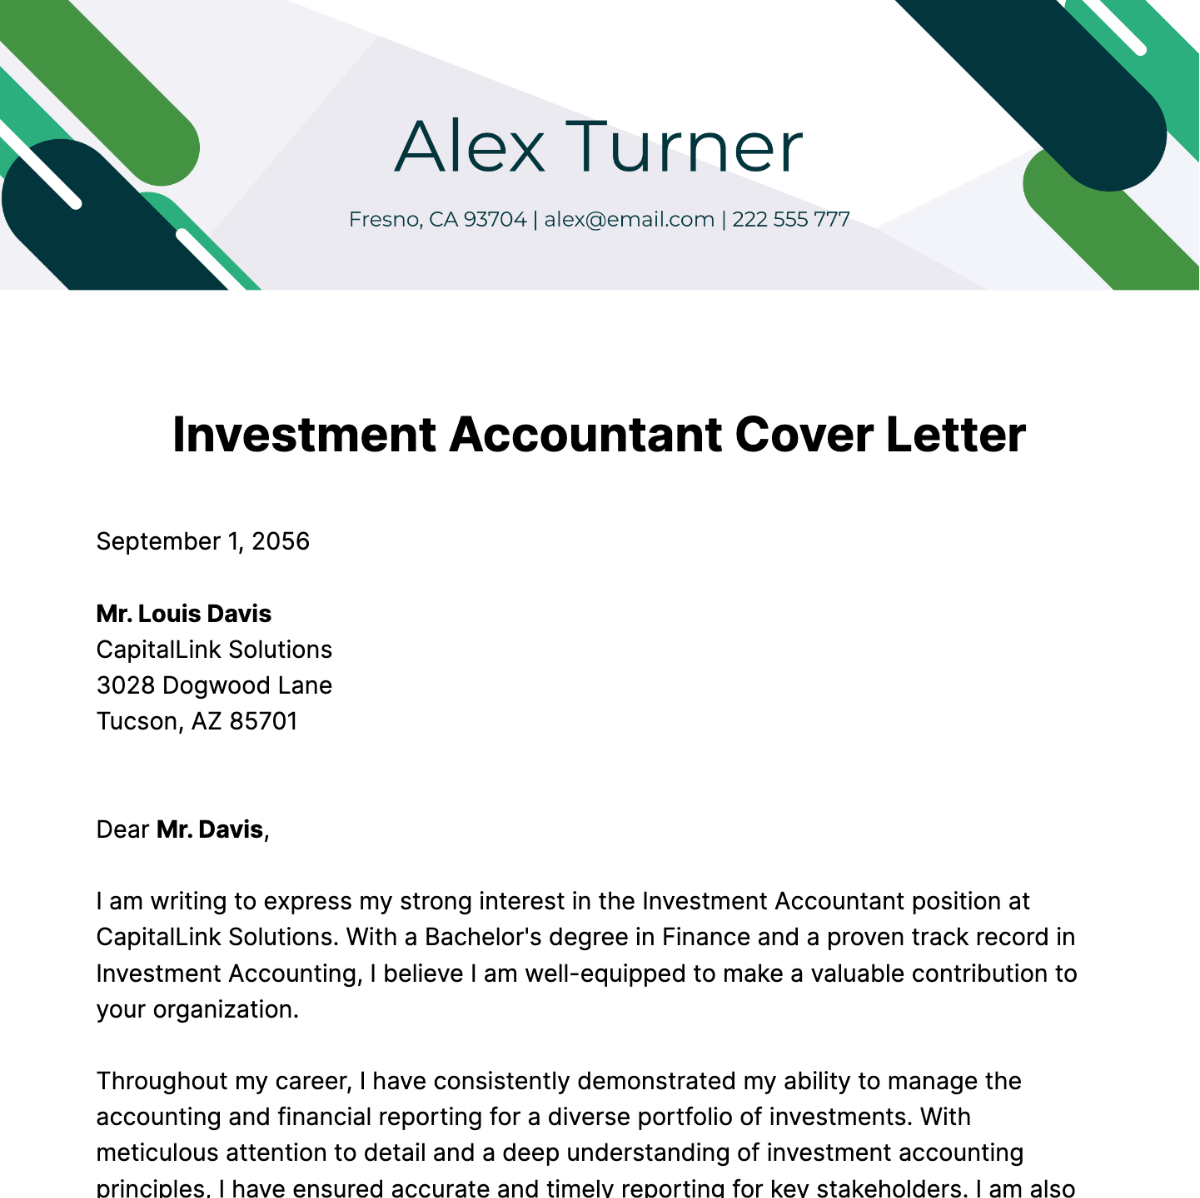 Investment Accountant Cover Letter Template